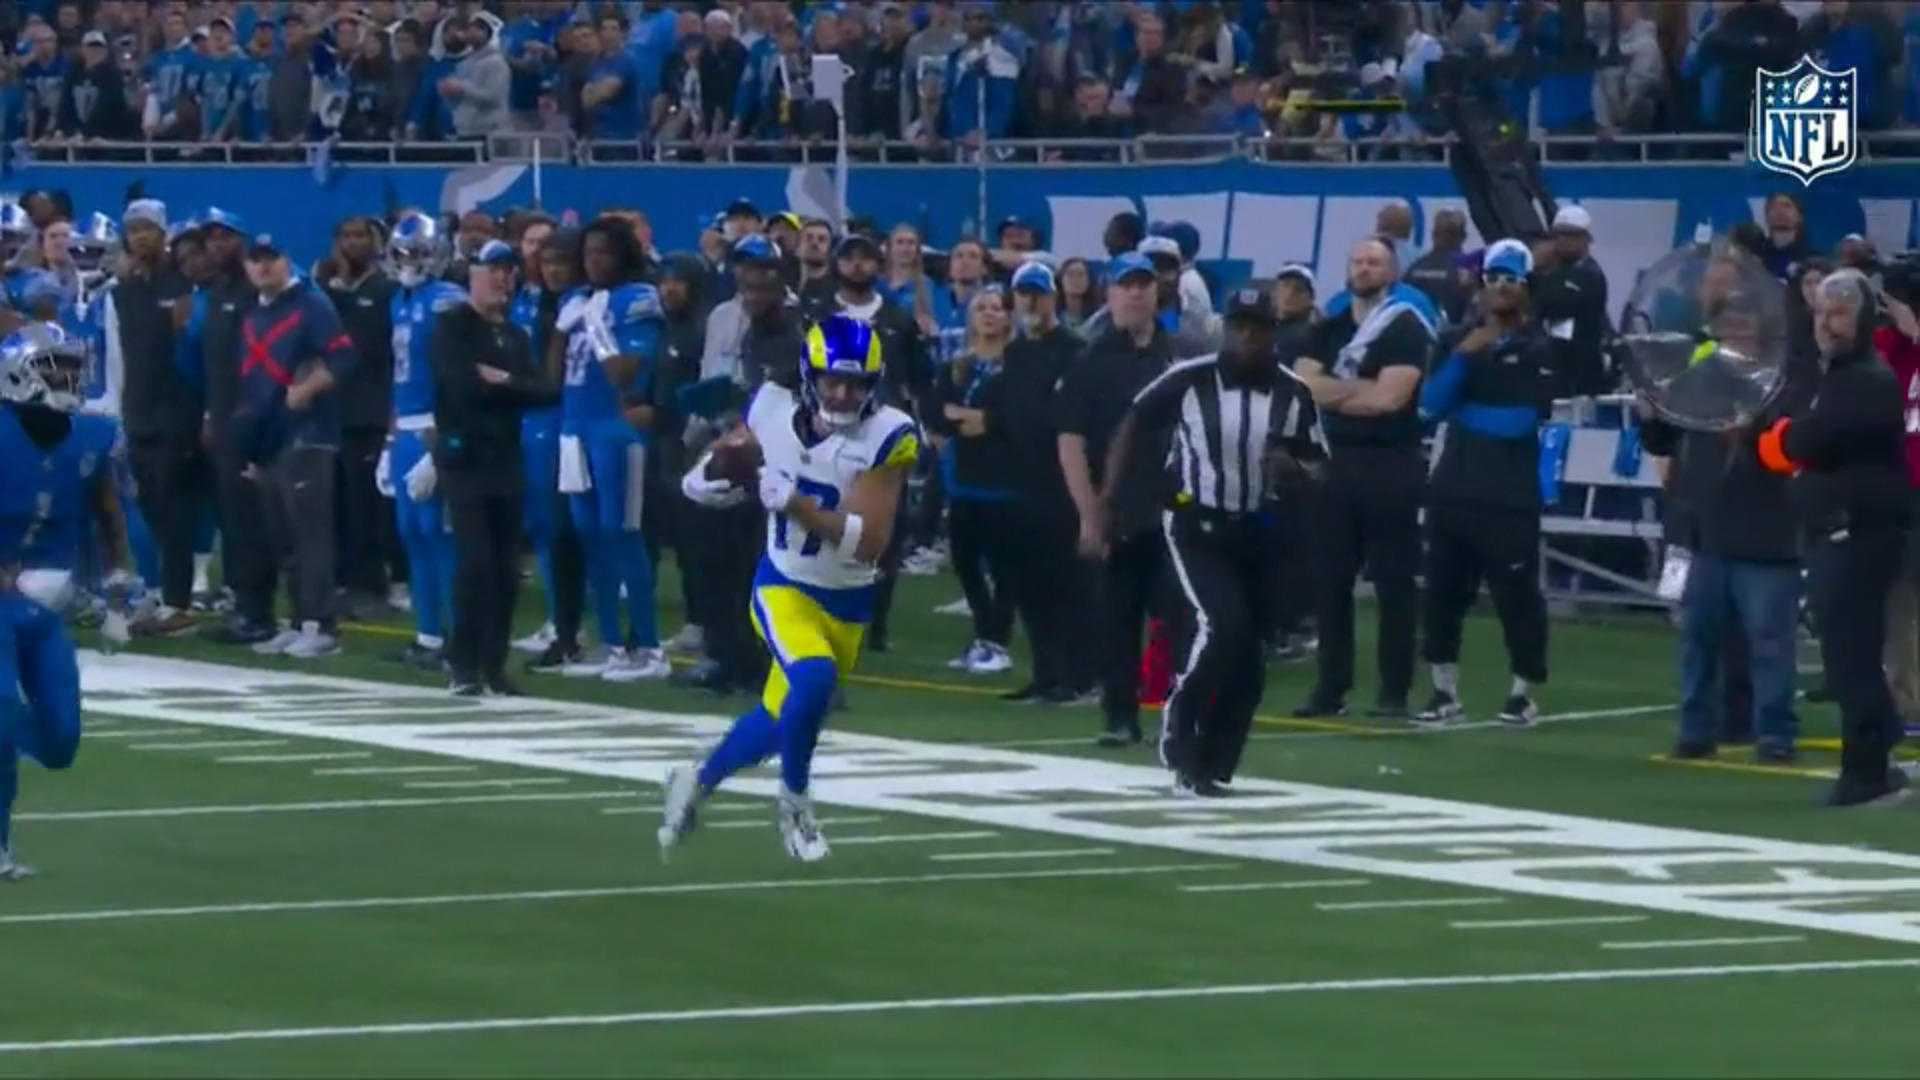 Puka Nacua runs unstoppably into the end zone. First playoff TD for rookie